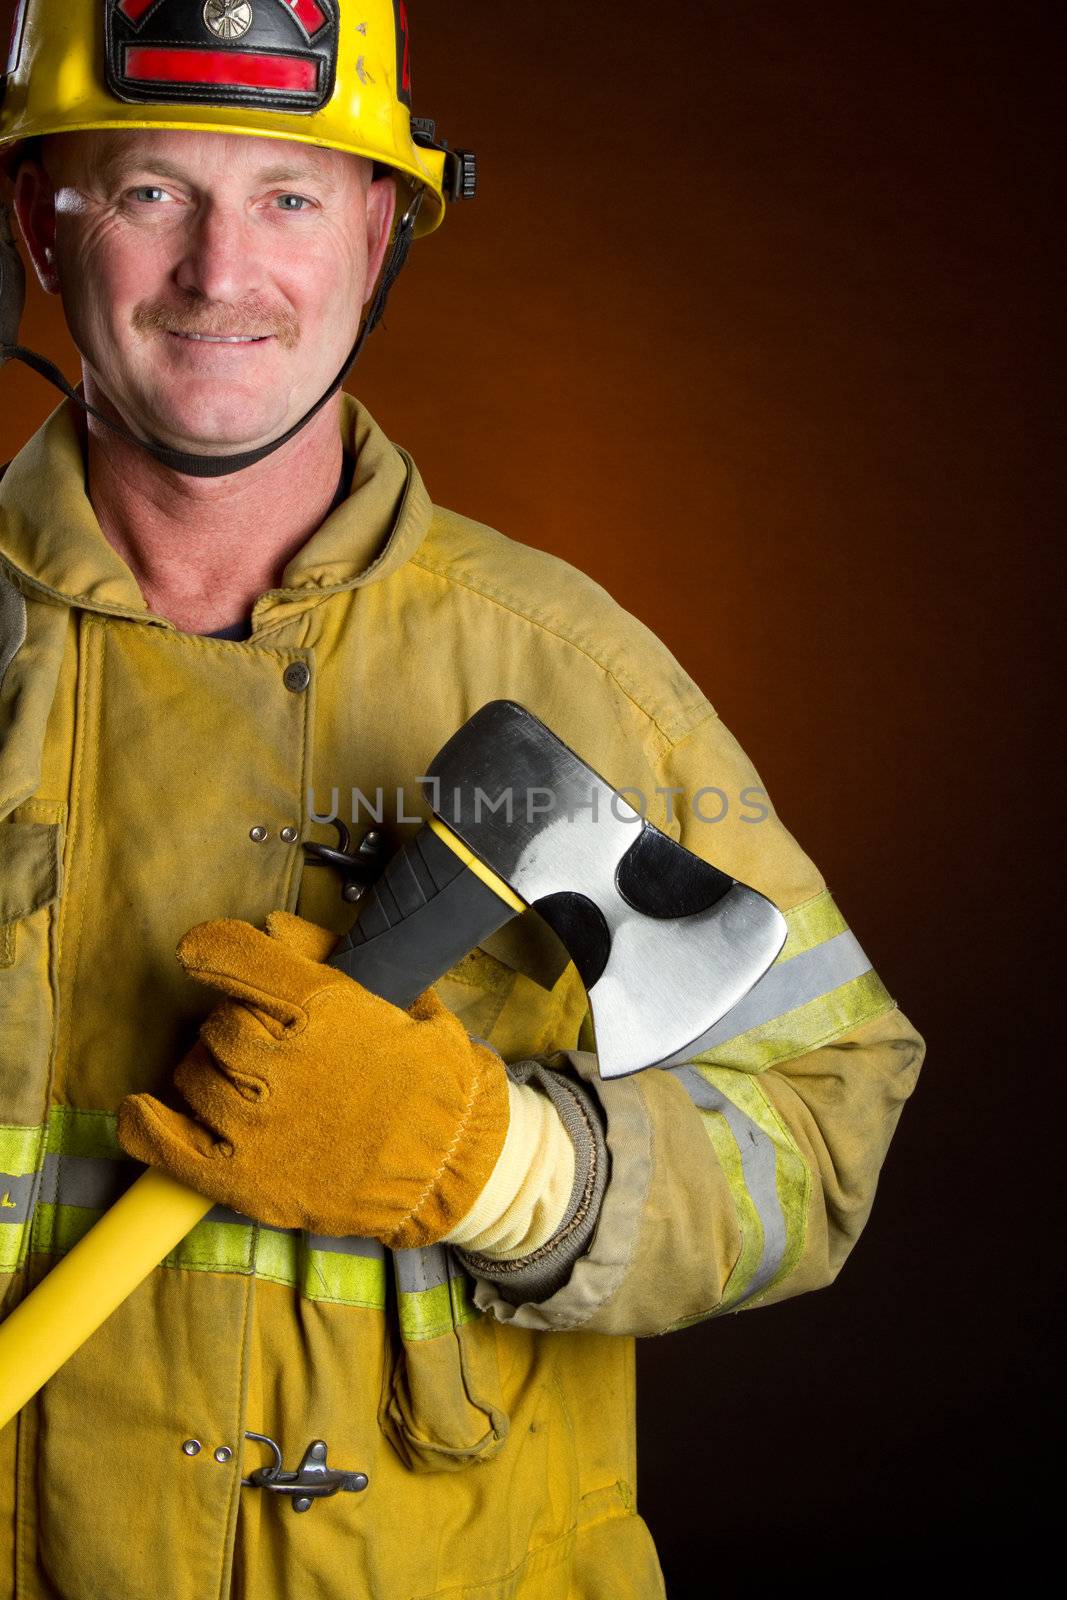 Smiling Firefighter by keeweeboy